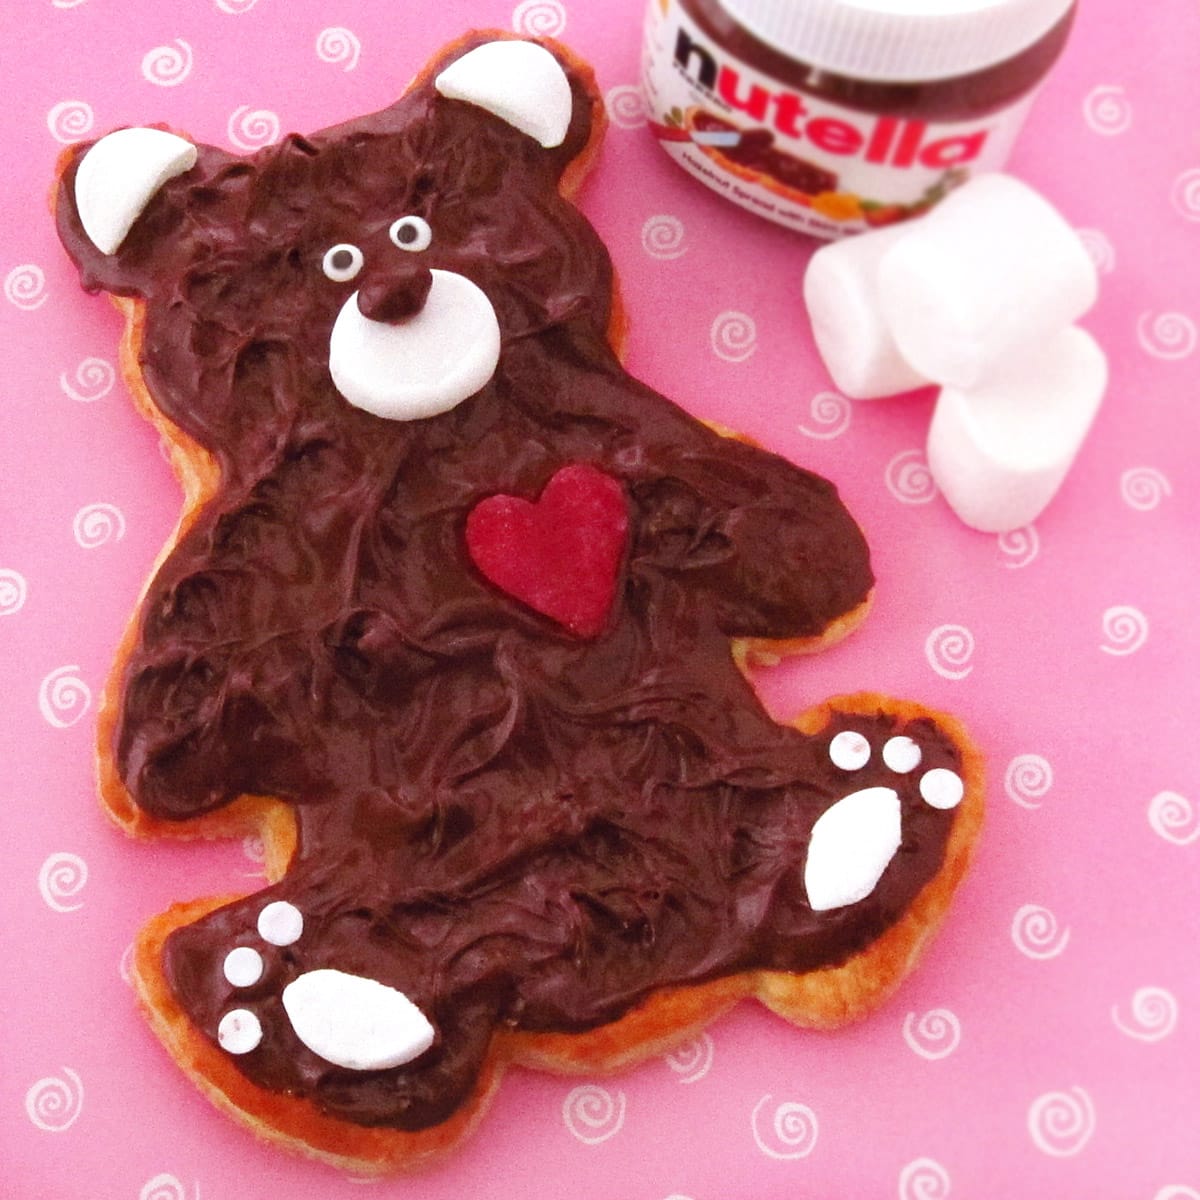 Nutella Tart Teddy Bear with marshmallow ears, snout, and paws, and a red candy heart and candy eyes